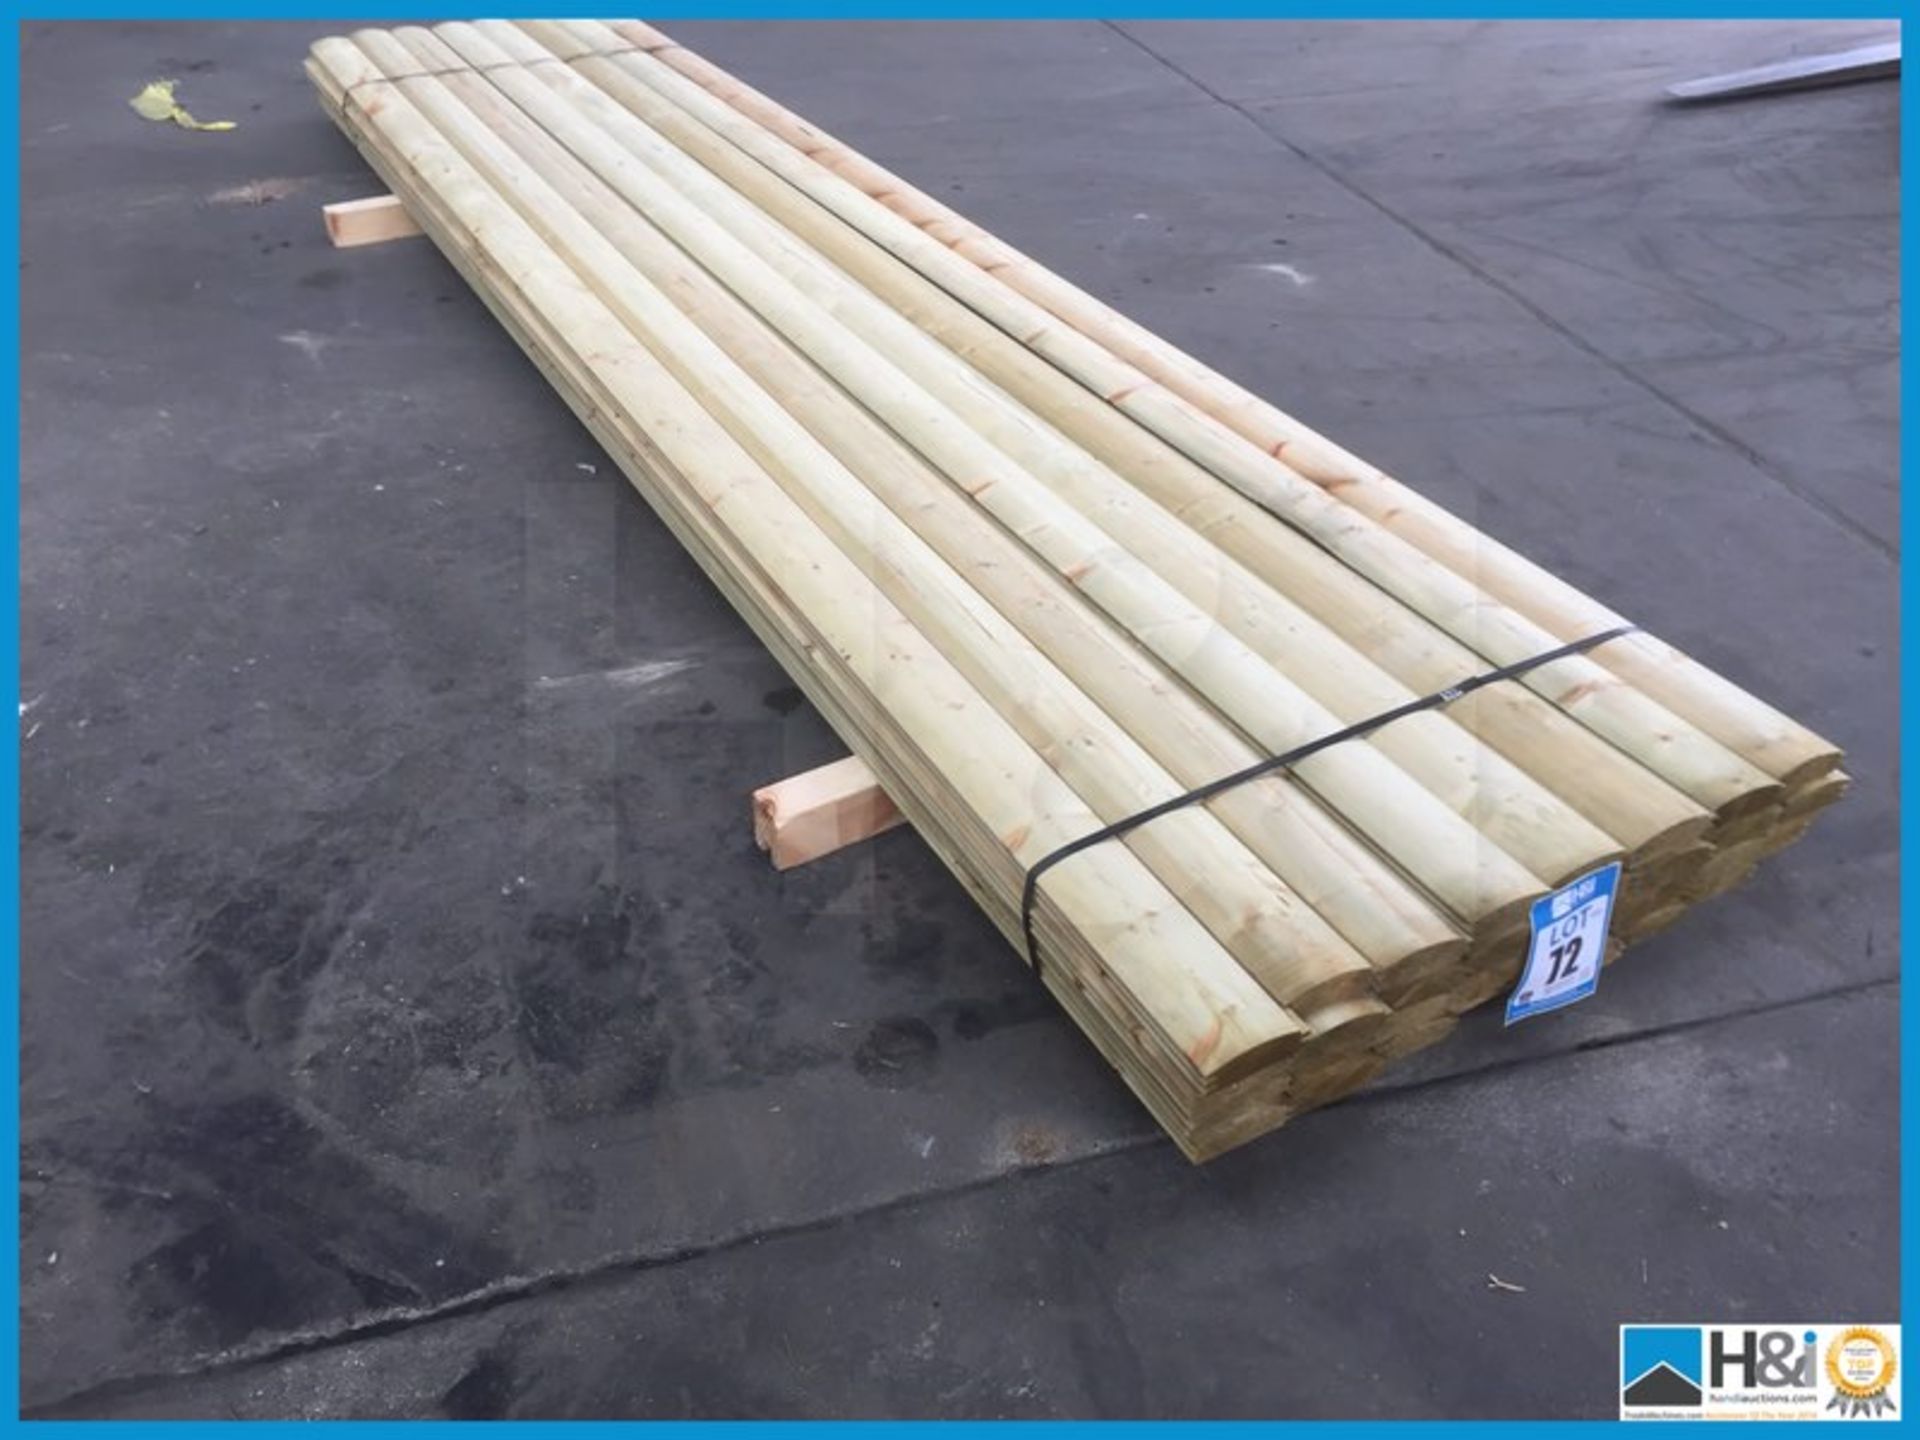 115 metres of Tanalised 36x112 double tongue and groove loglap. 32 lengths at 3.6 metres long. - Image 5 of 5